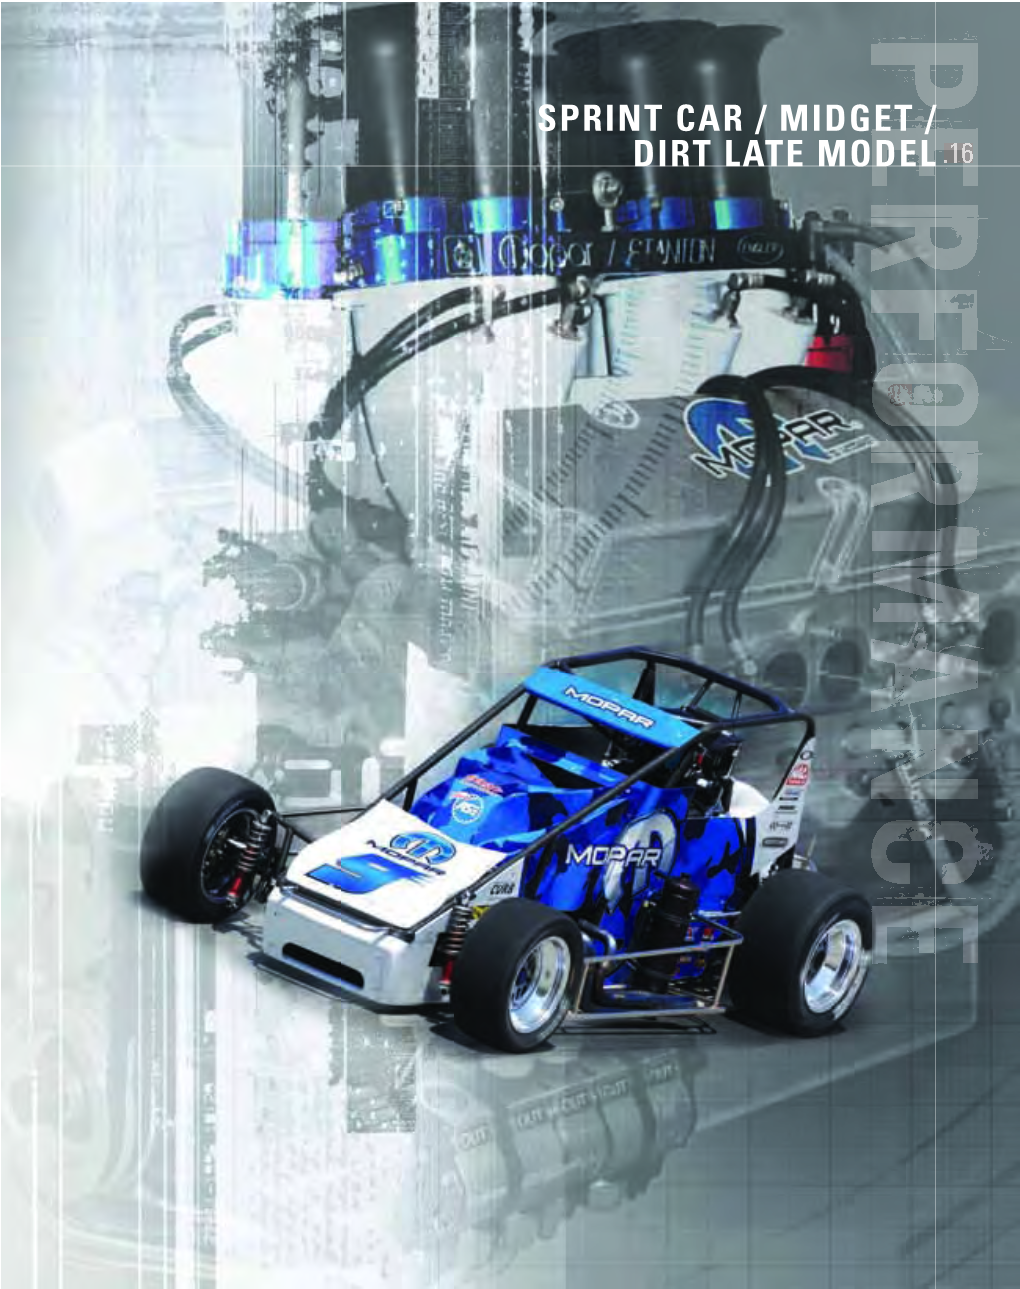 Sprint Car / Midget / Dirt Late Model .16 Mopar Performance Terms and Conditions